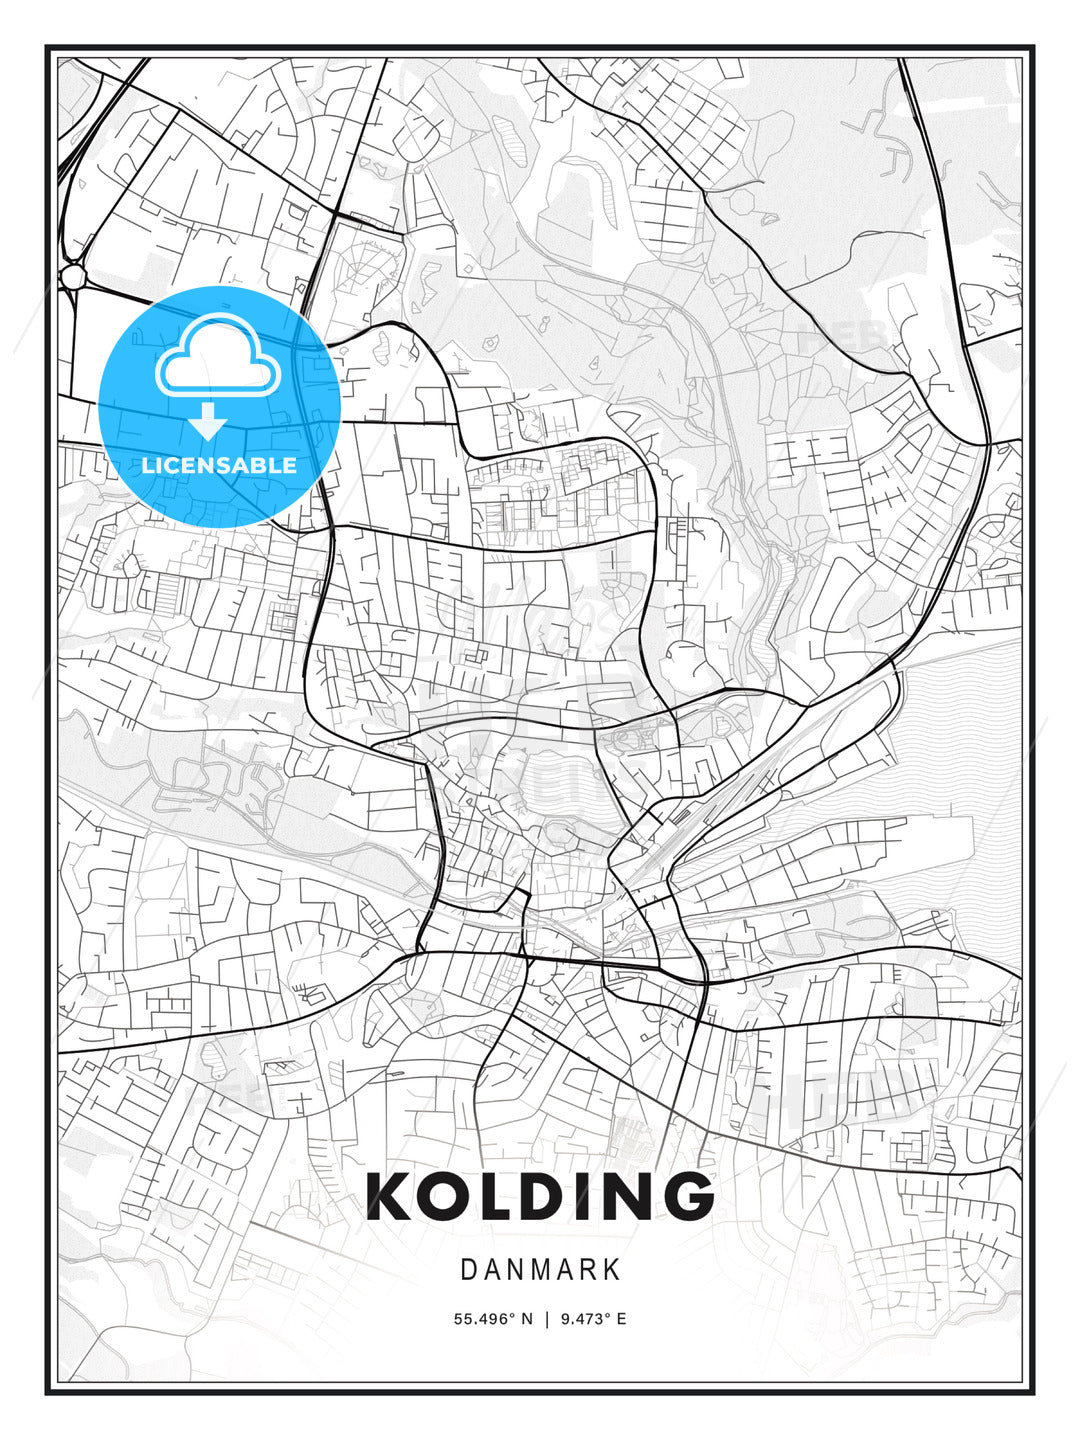 Kolding, Denmark, Modern Print Template in Various Formats - HEBSTREITS Sketches